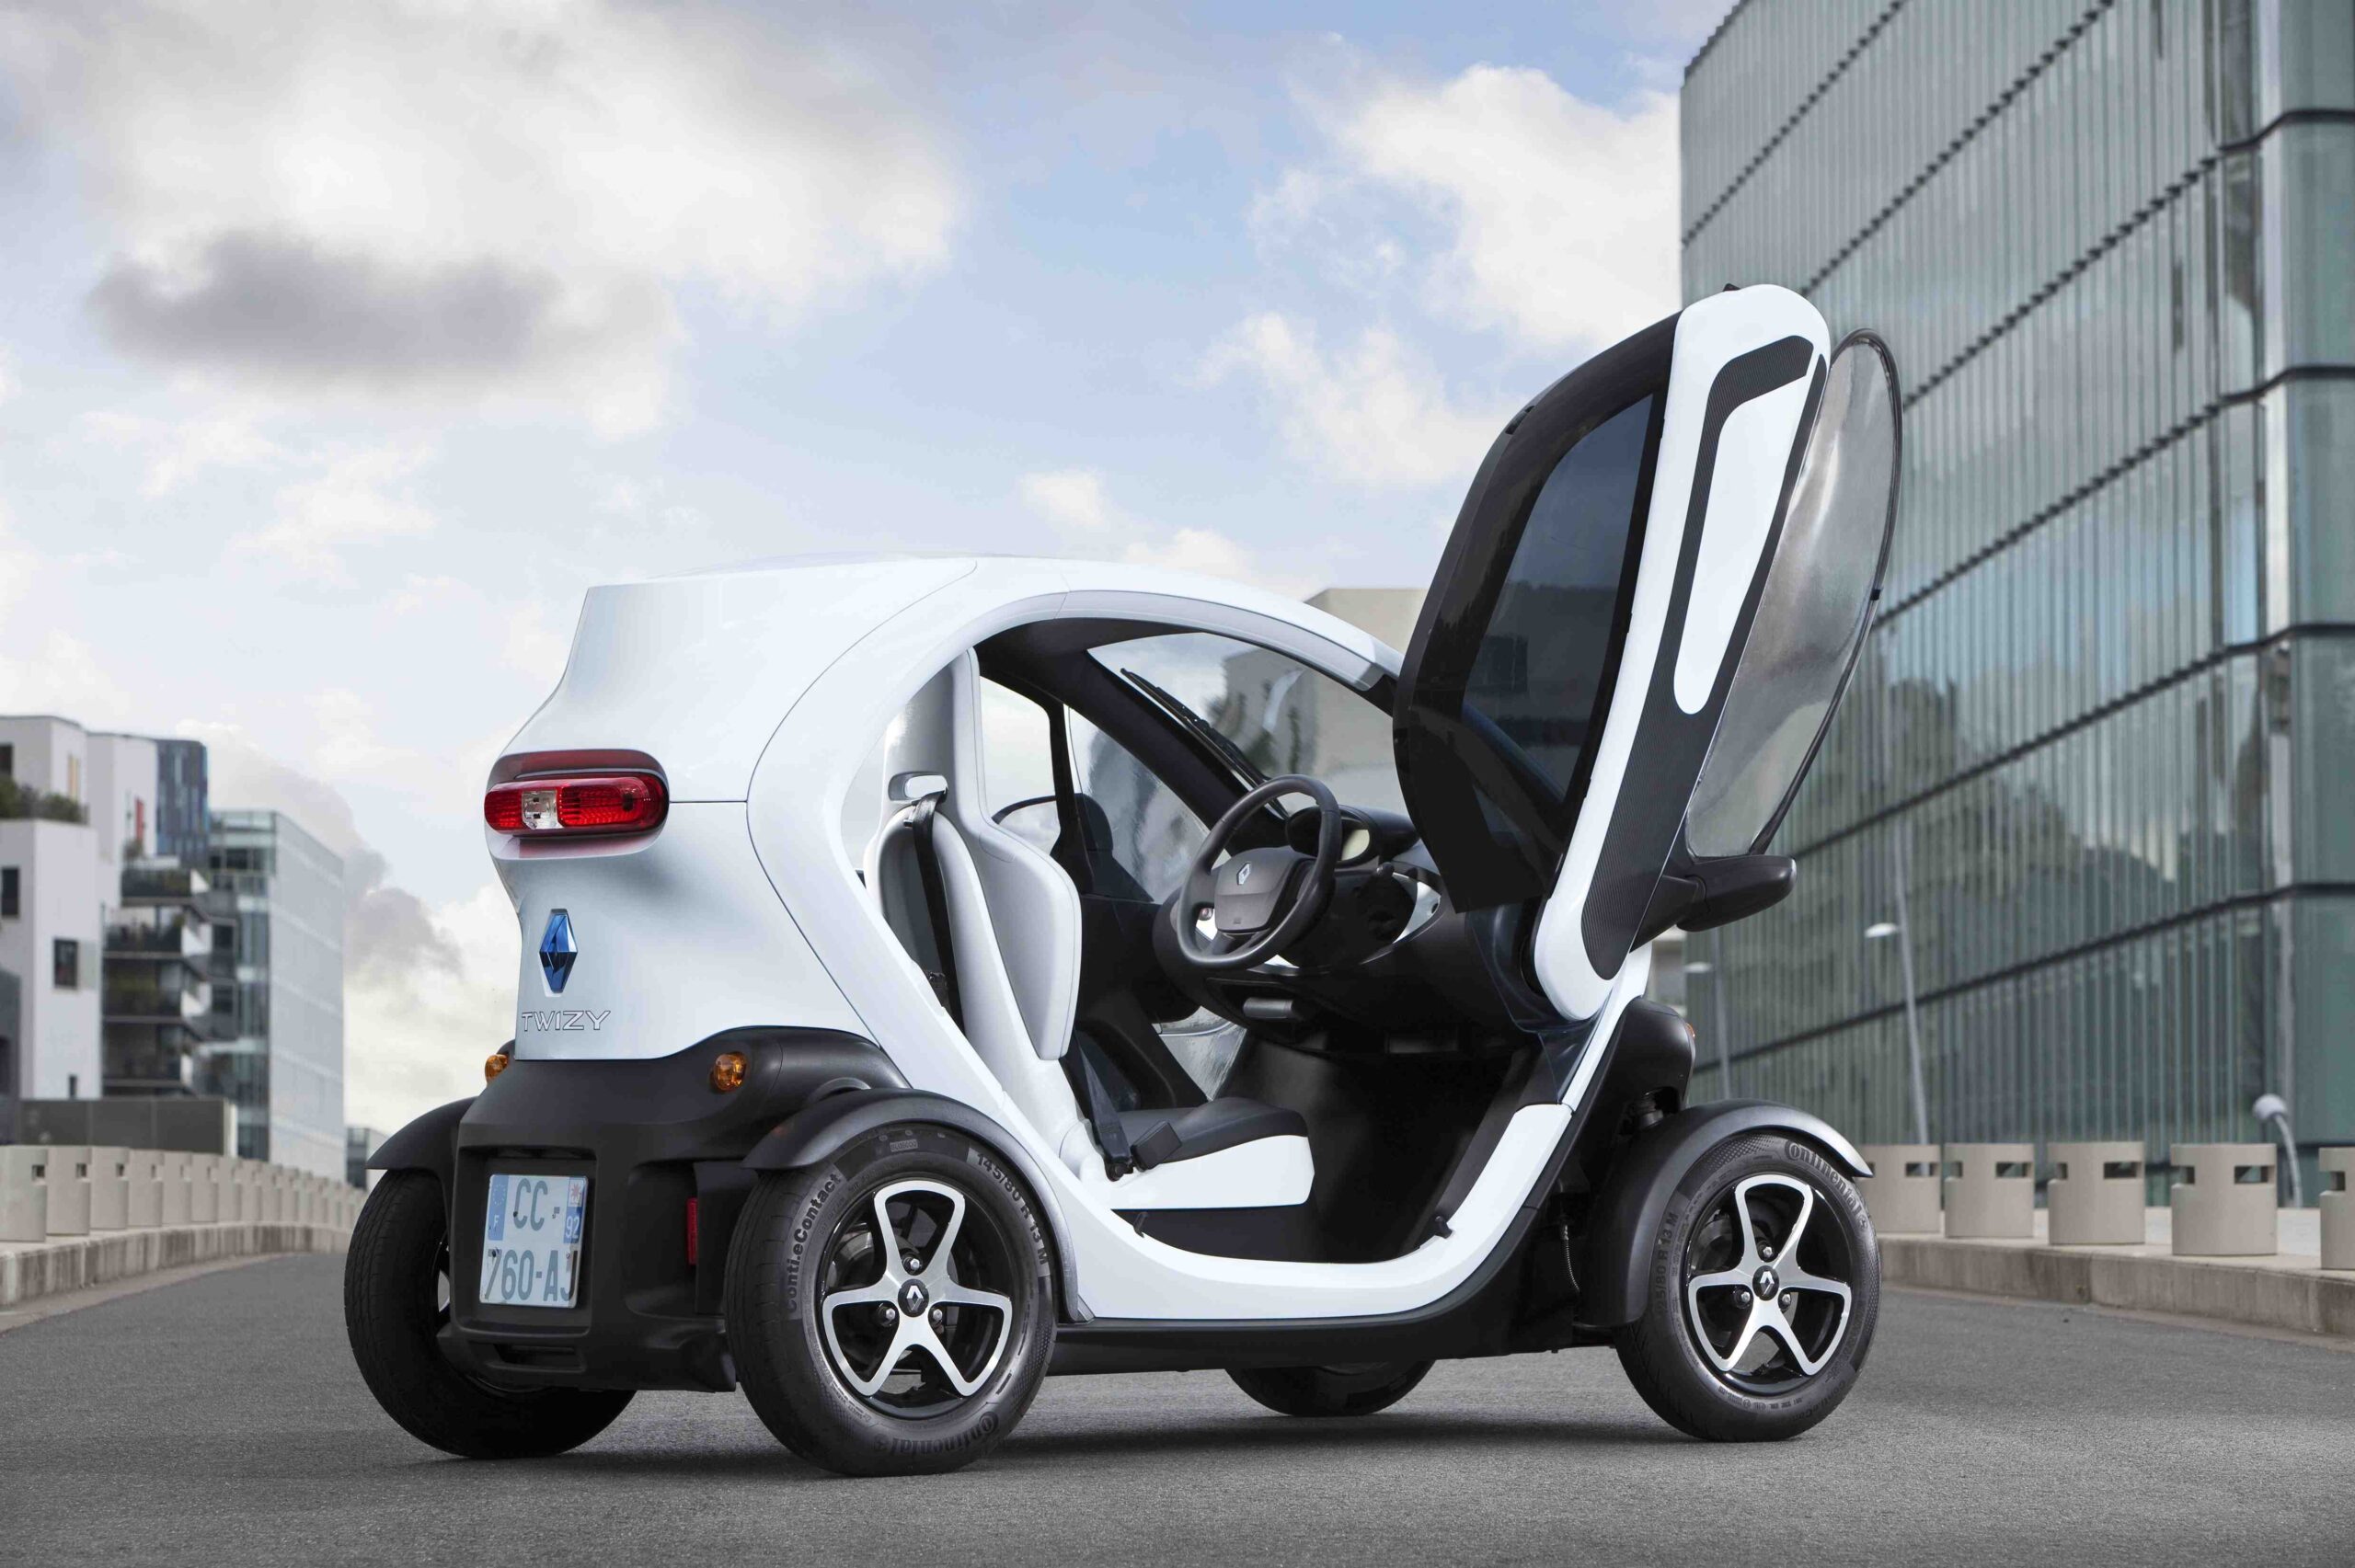 Comment charger Twizy?